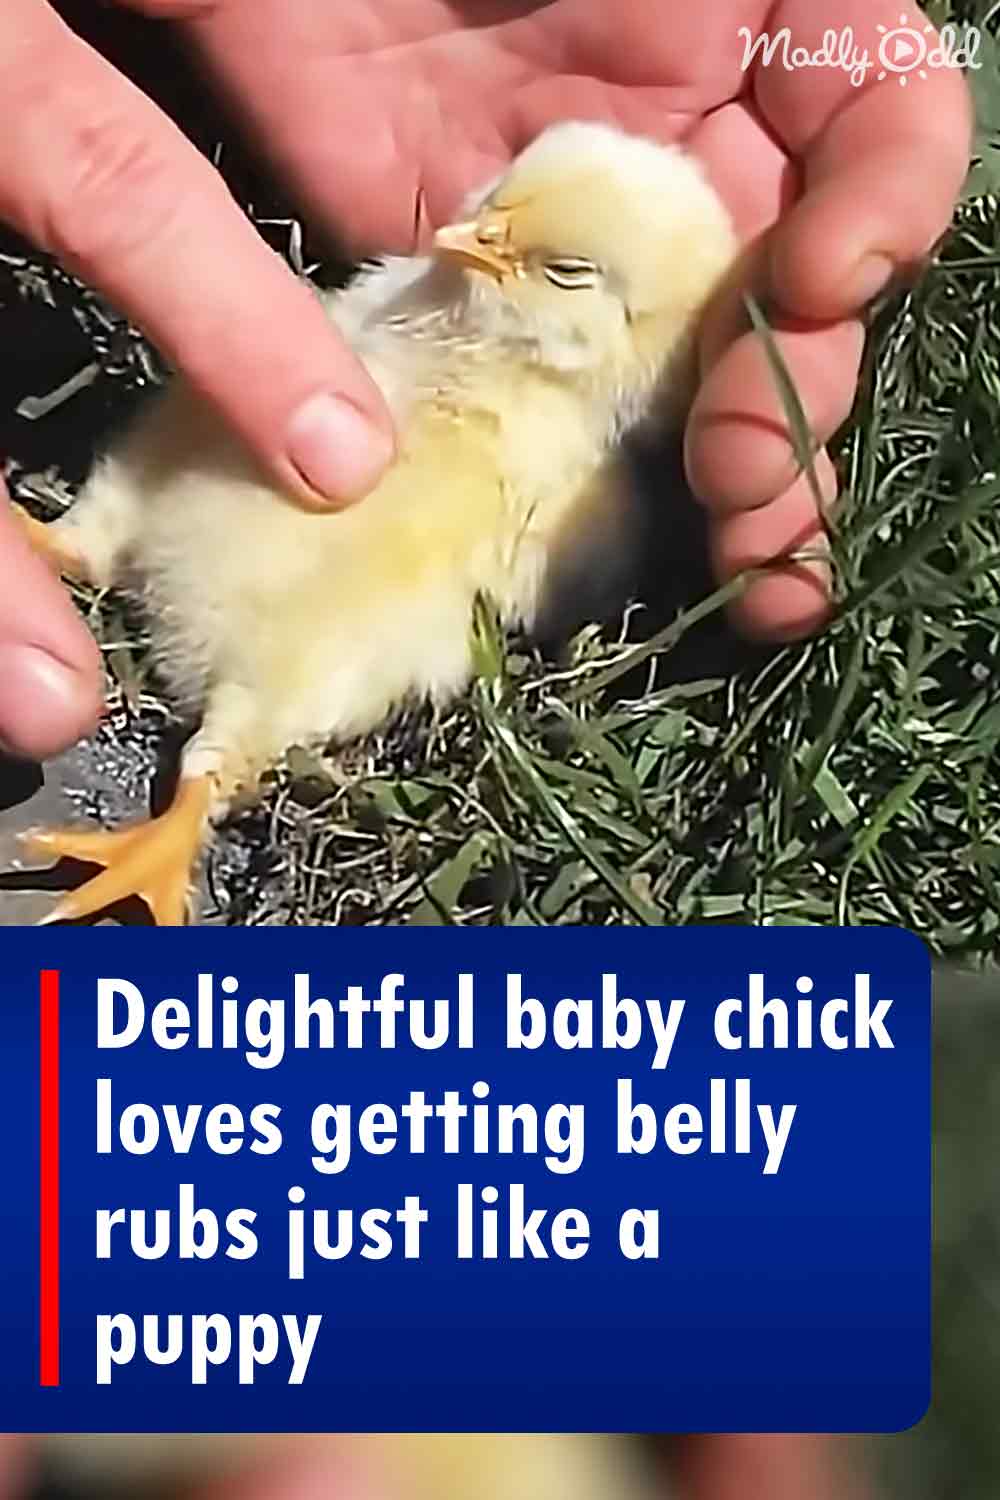 Delightful baby chick loves getting belly rubs just like a puppy